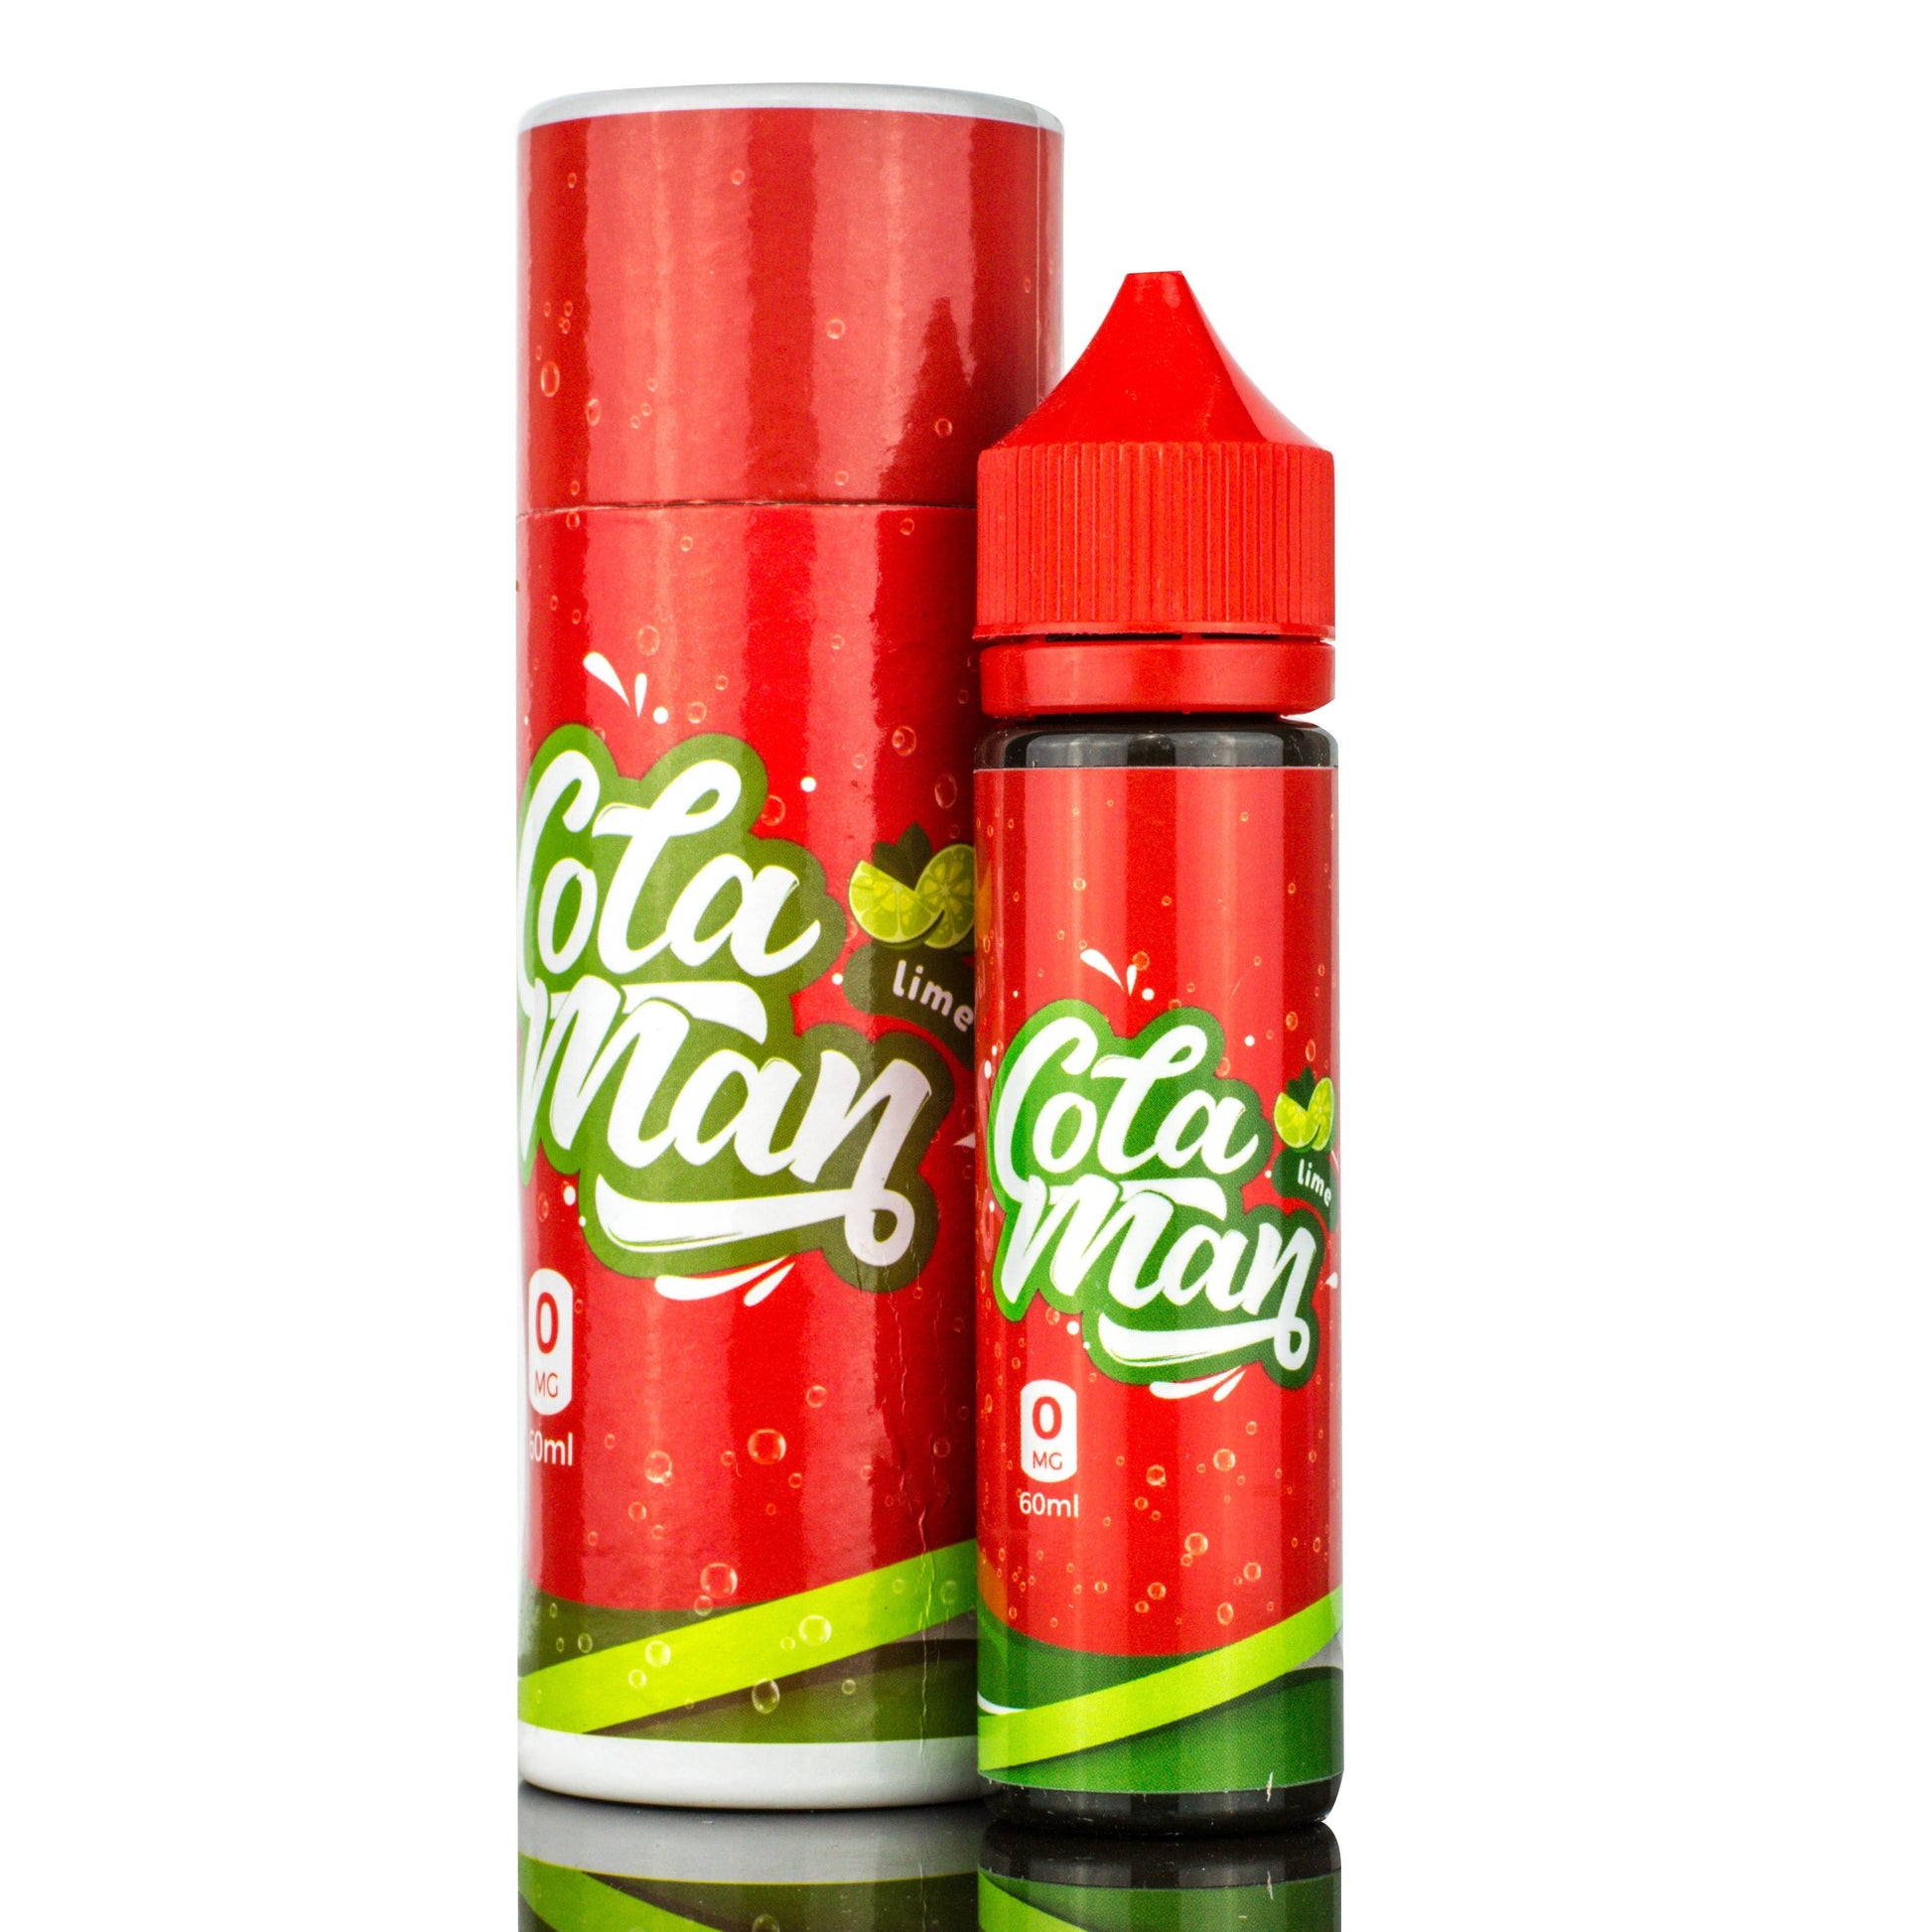 Cola Man Lime by Cola Man Series 60mL with Packaging